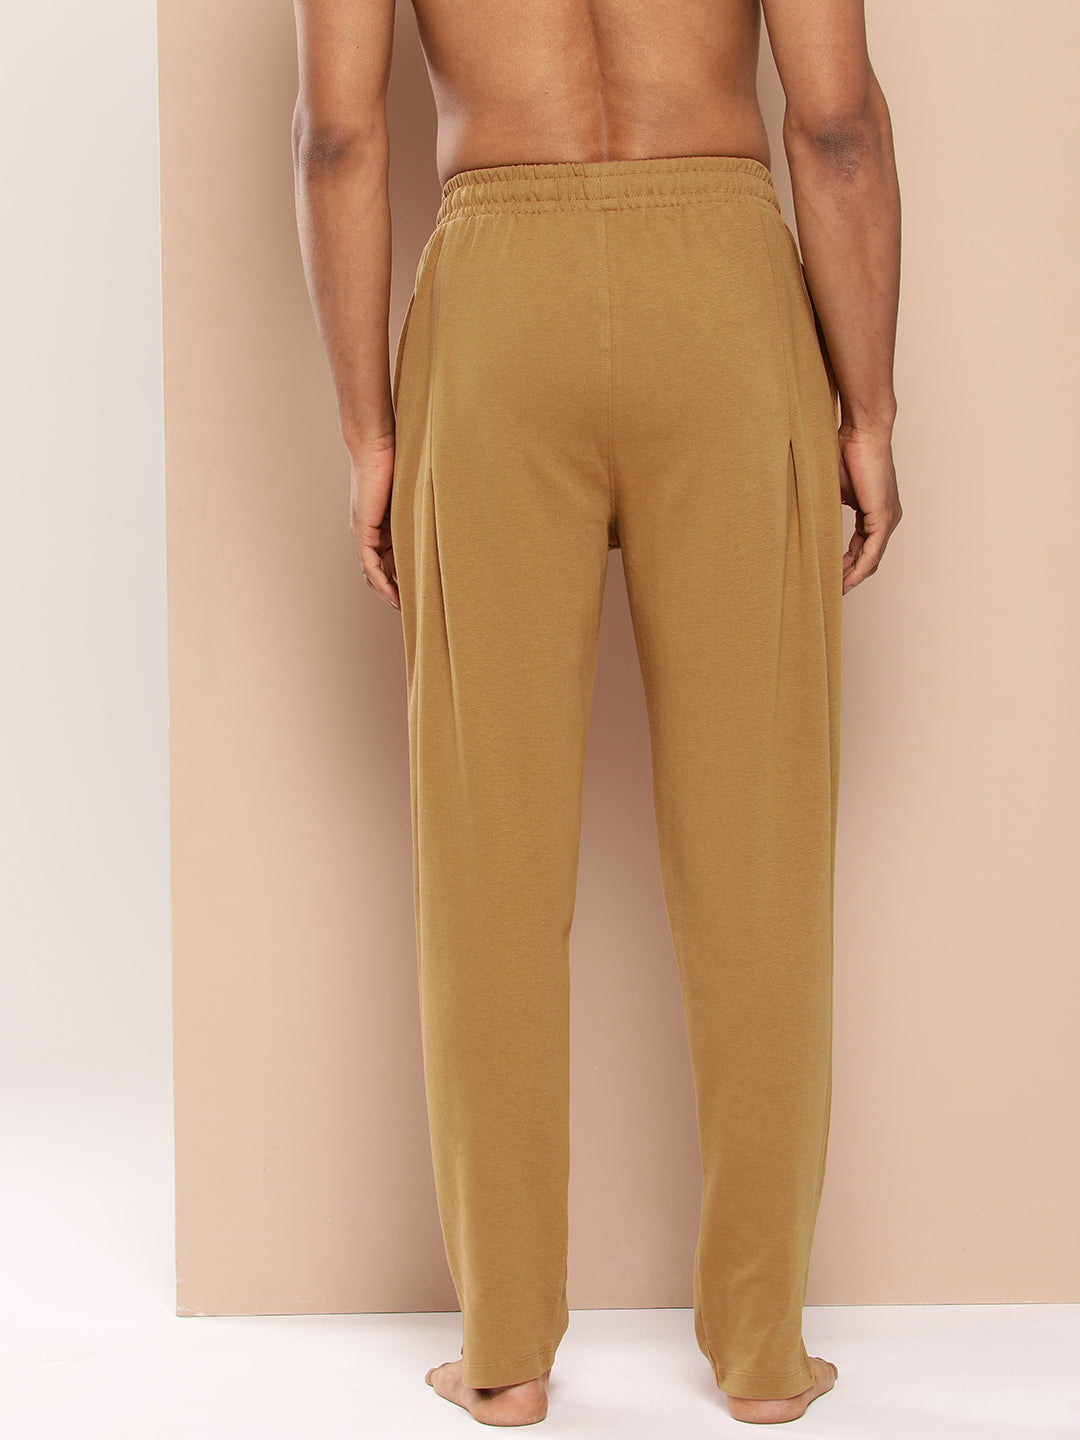 Relaxed Fit All Day Trackpants